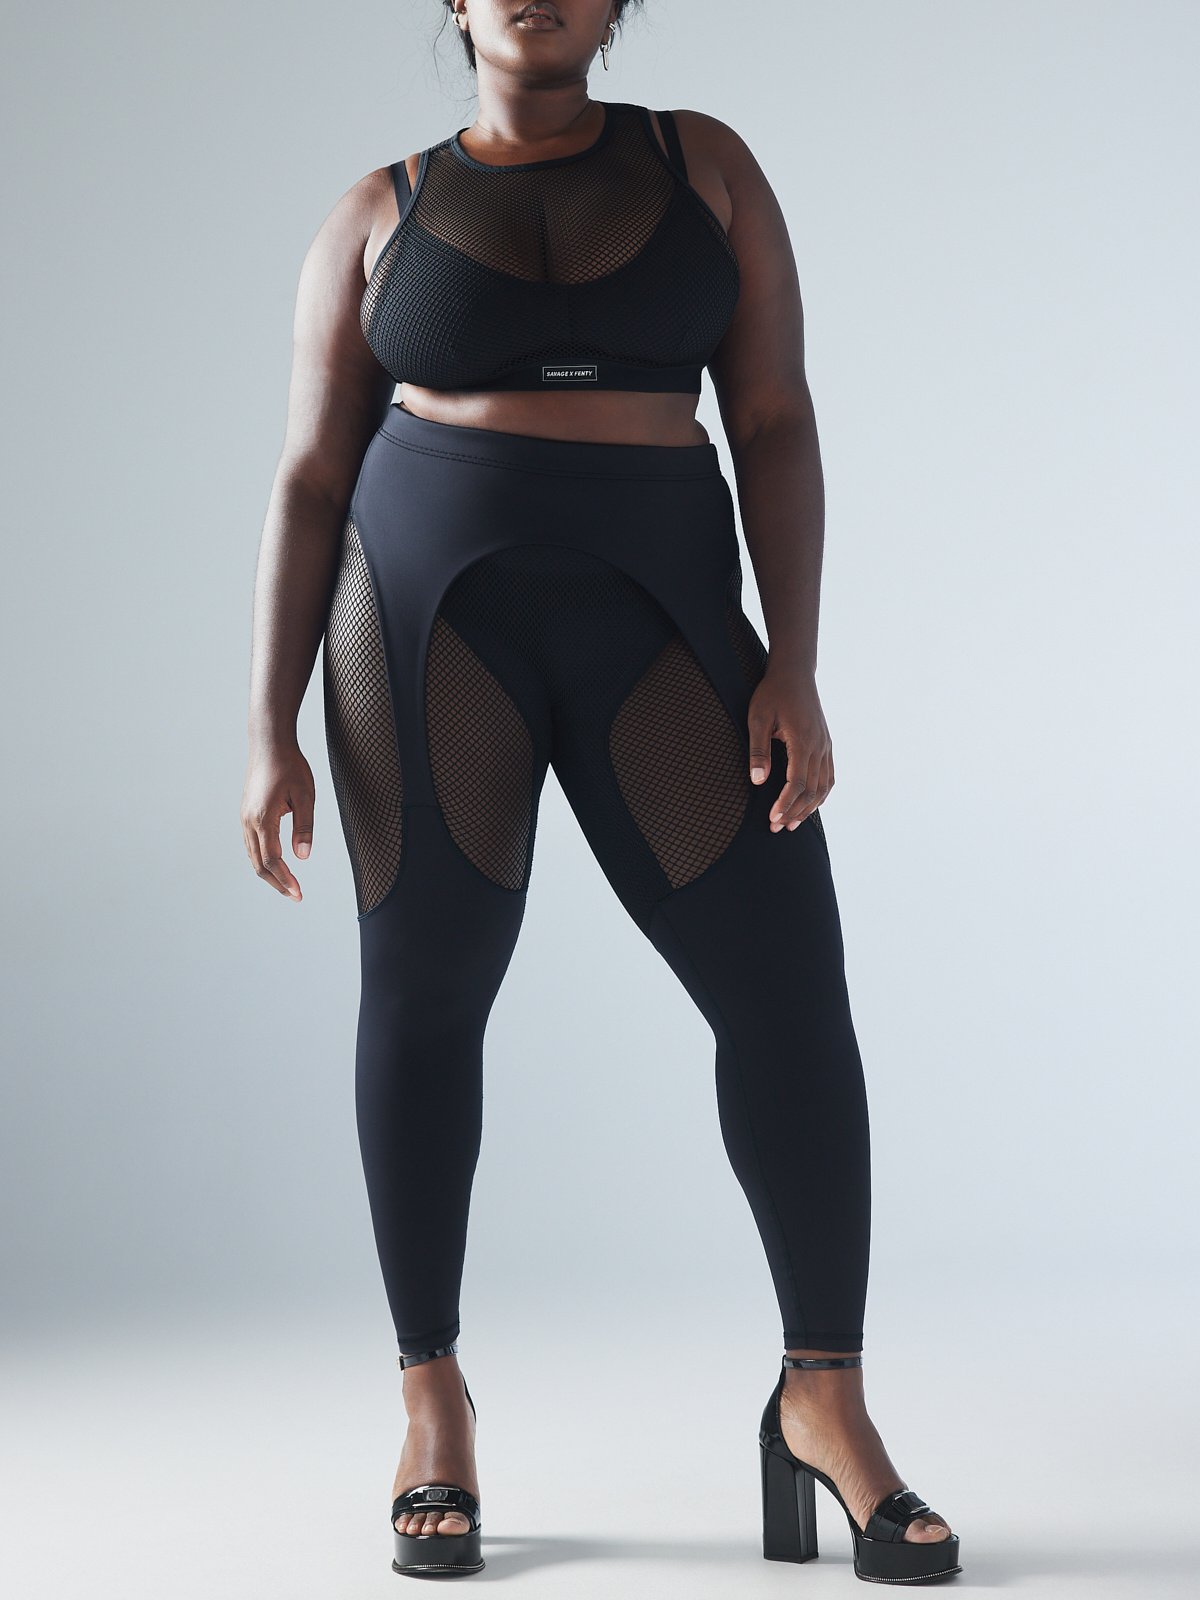 Savage X Fenty Leggings Black Size 1X - $16 (54% Off Retail) New With Tags  - From Jada